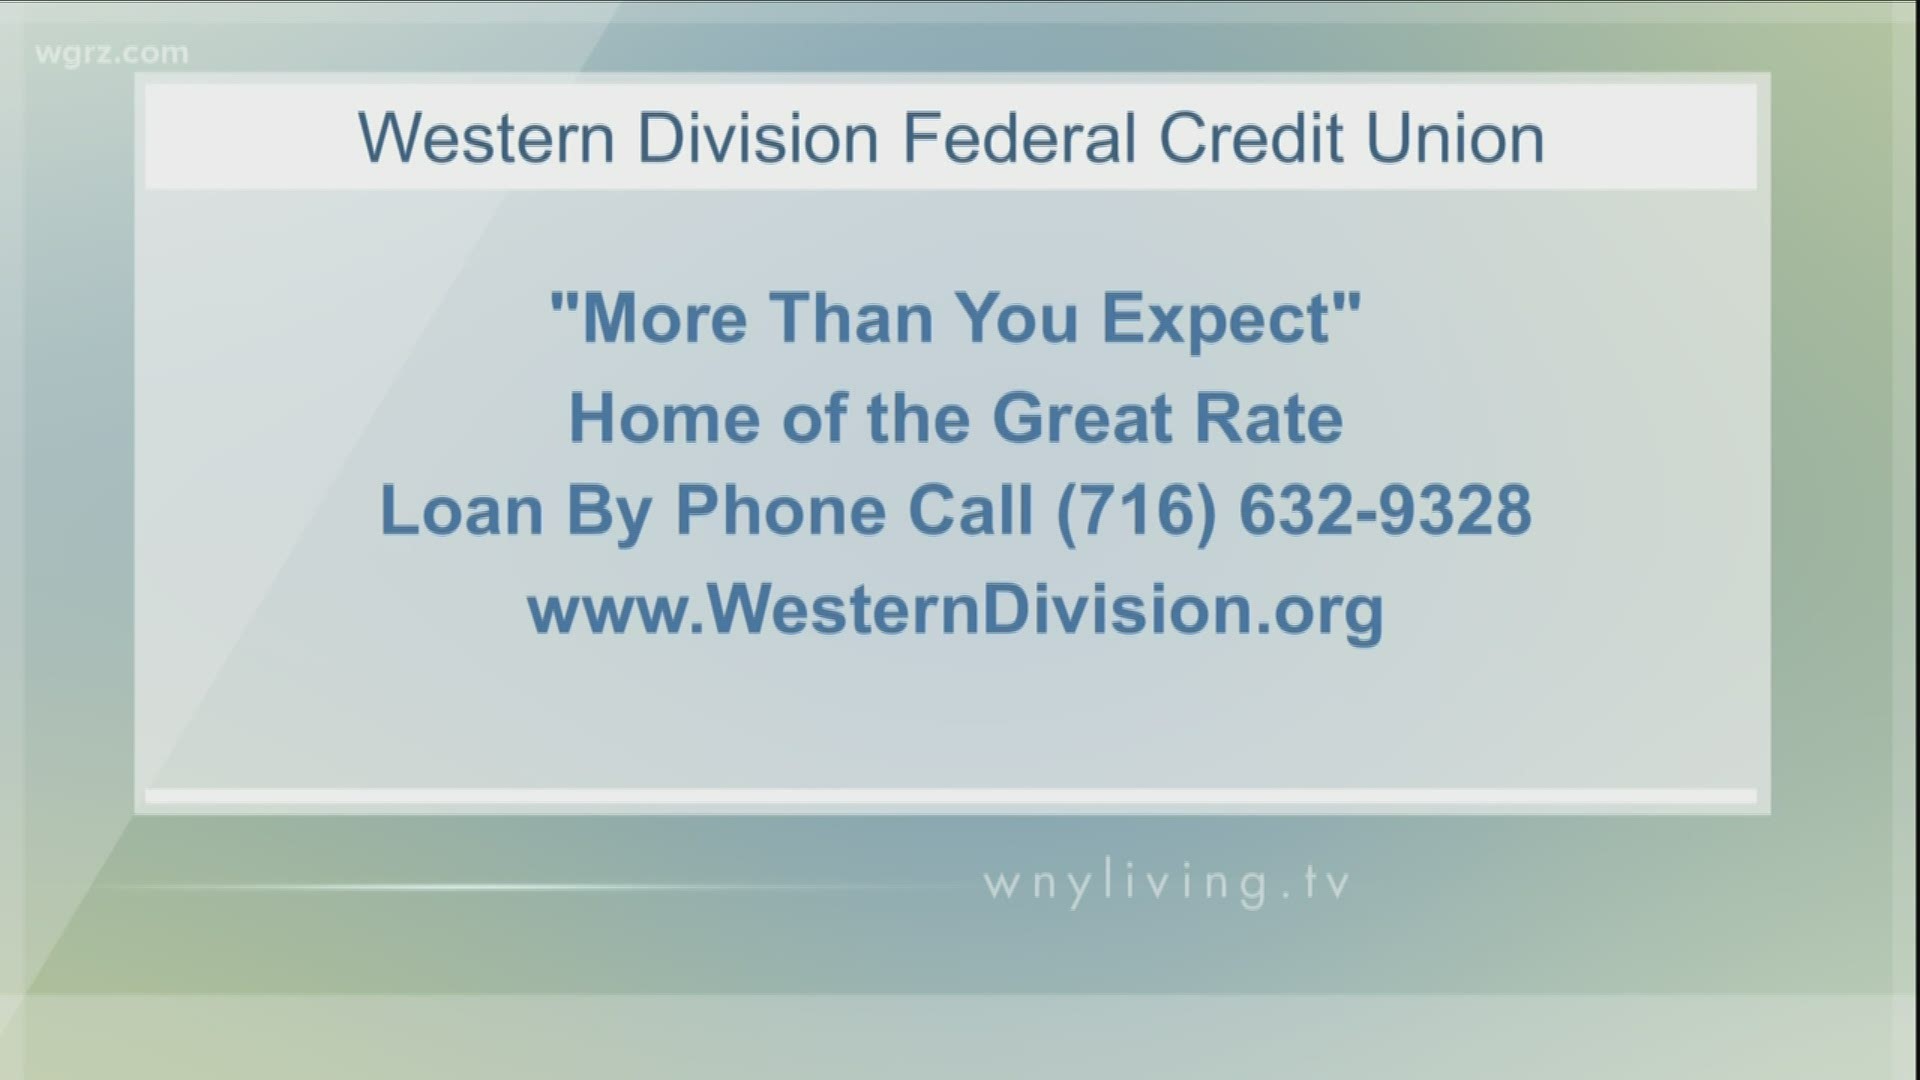 January 11 - WECK Western Division Federal Credit Union (THIS VIDEO IS SPONSORED BY WESTERN DIVISION FEDERAL CREDIT UNION)